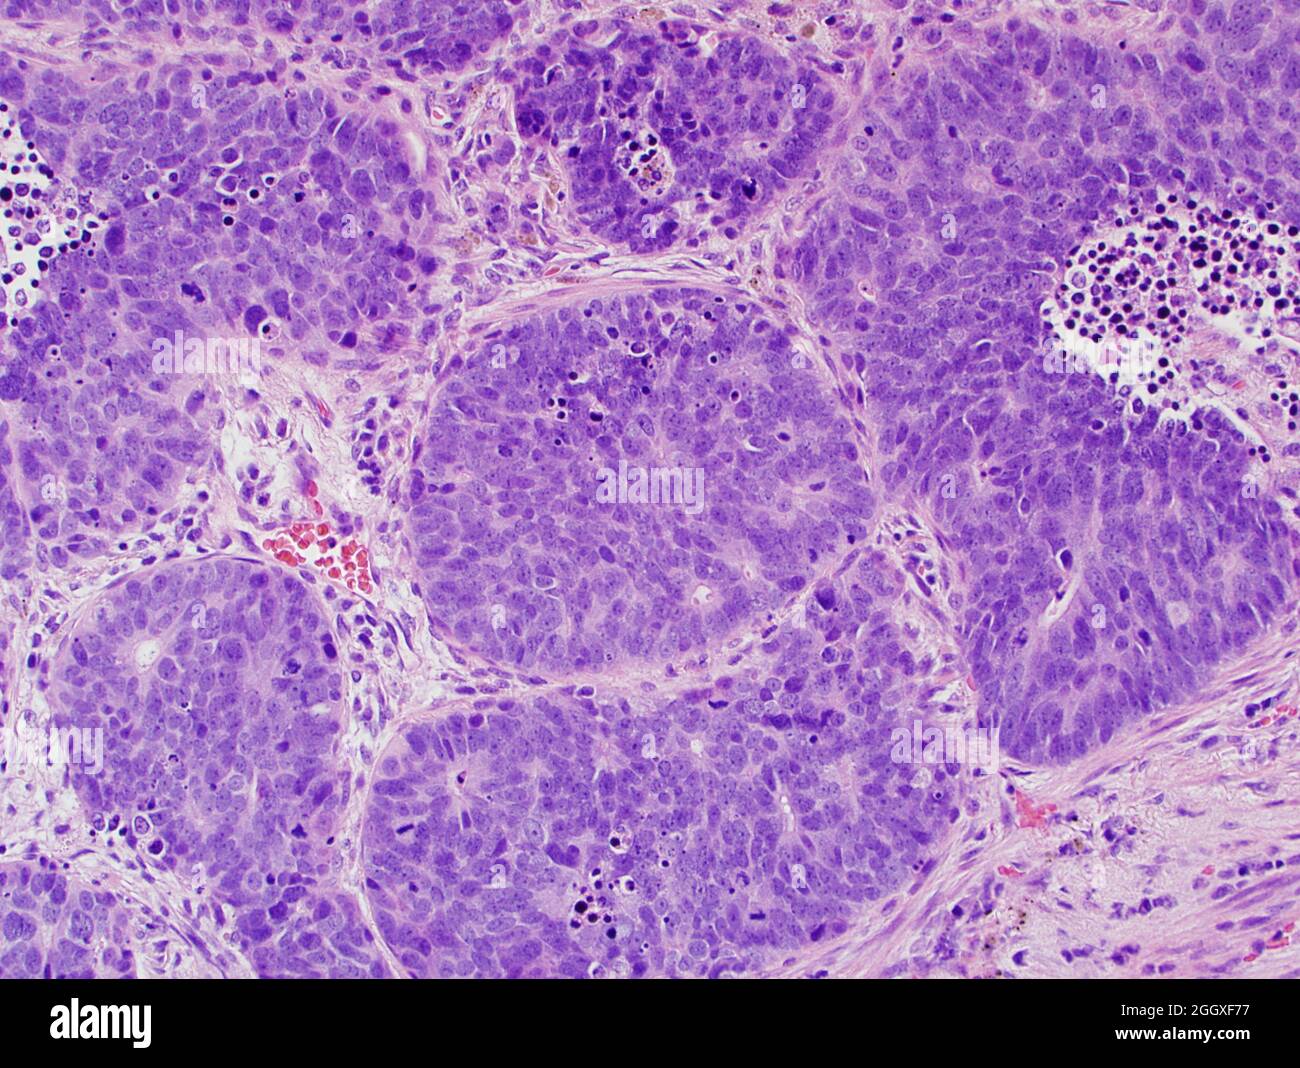 Lung cancer: large cell neuroendocrine carcinoma Stock Photo